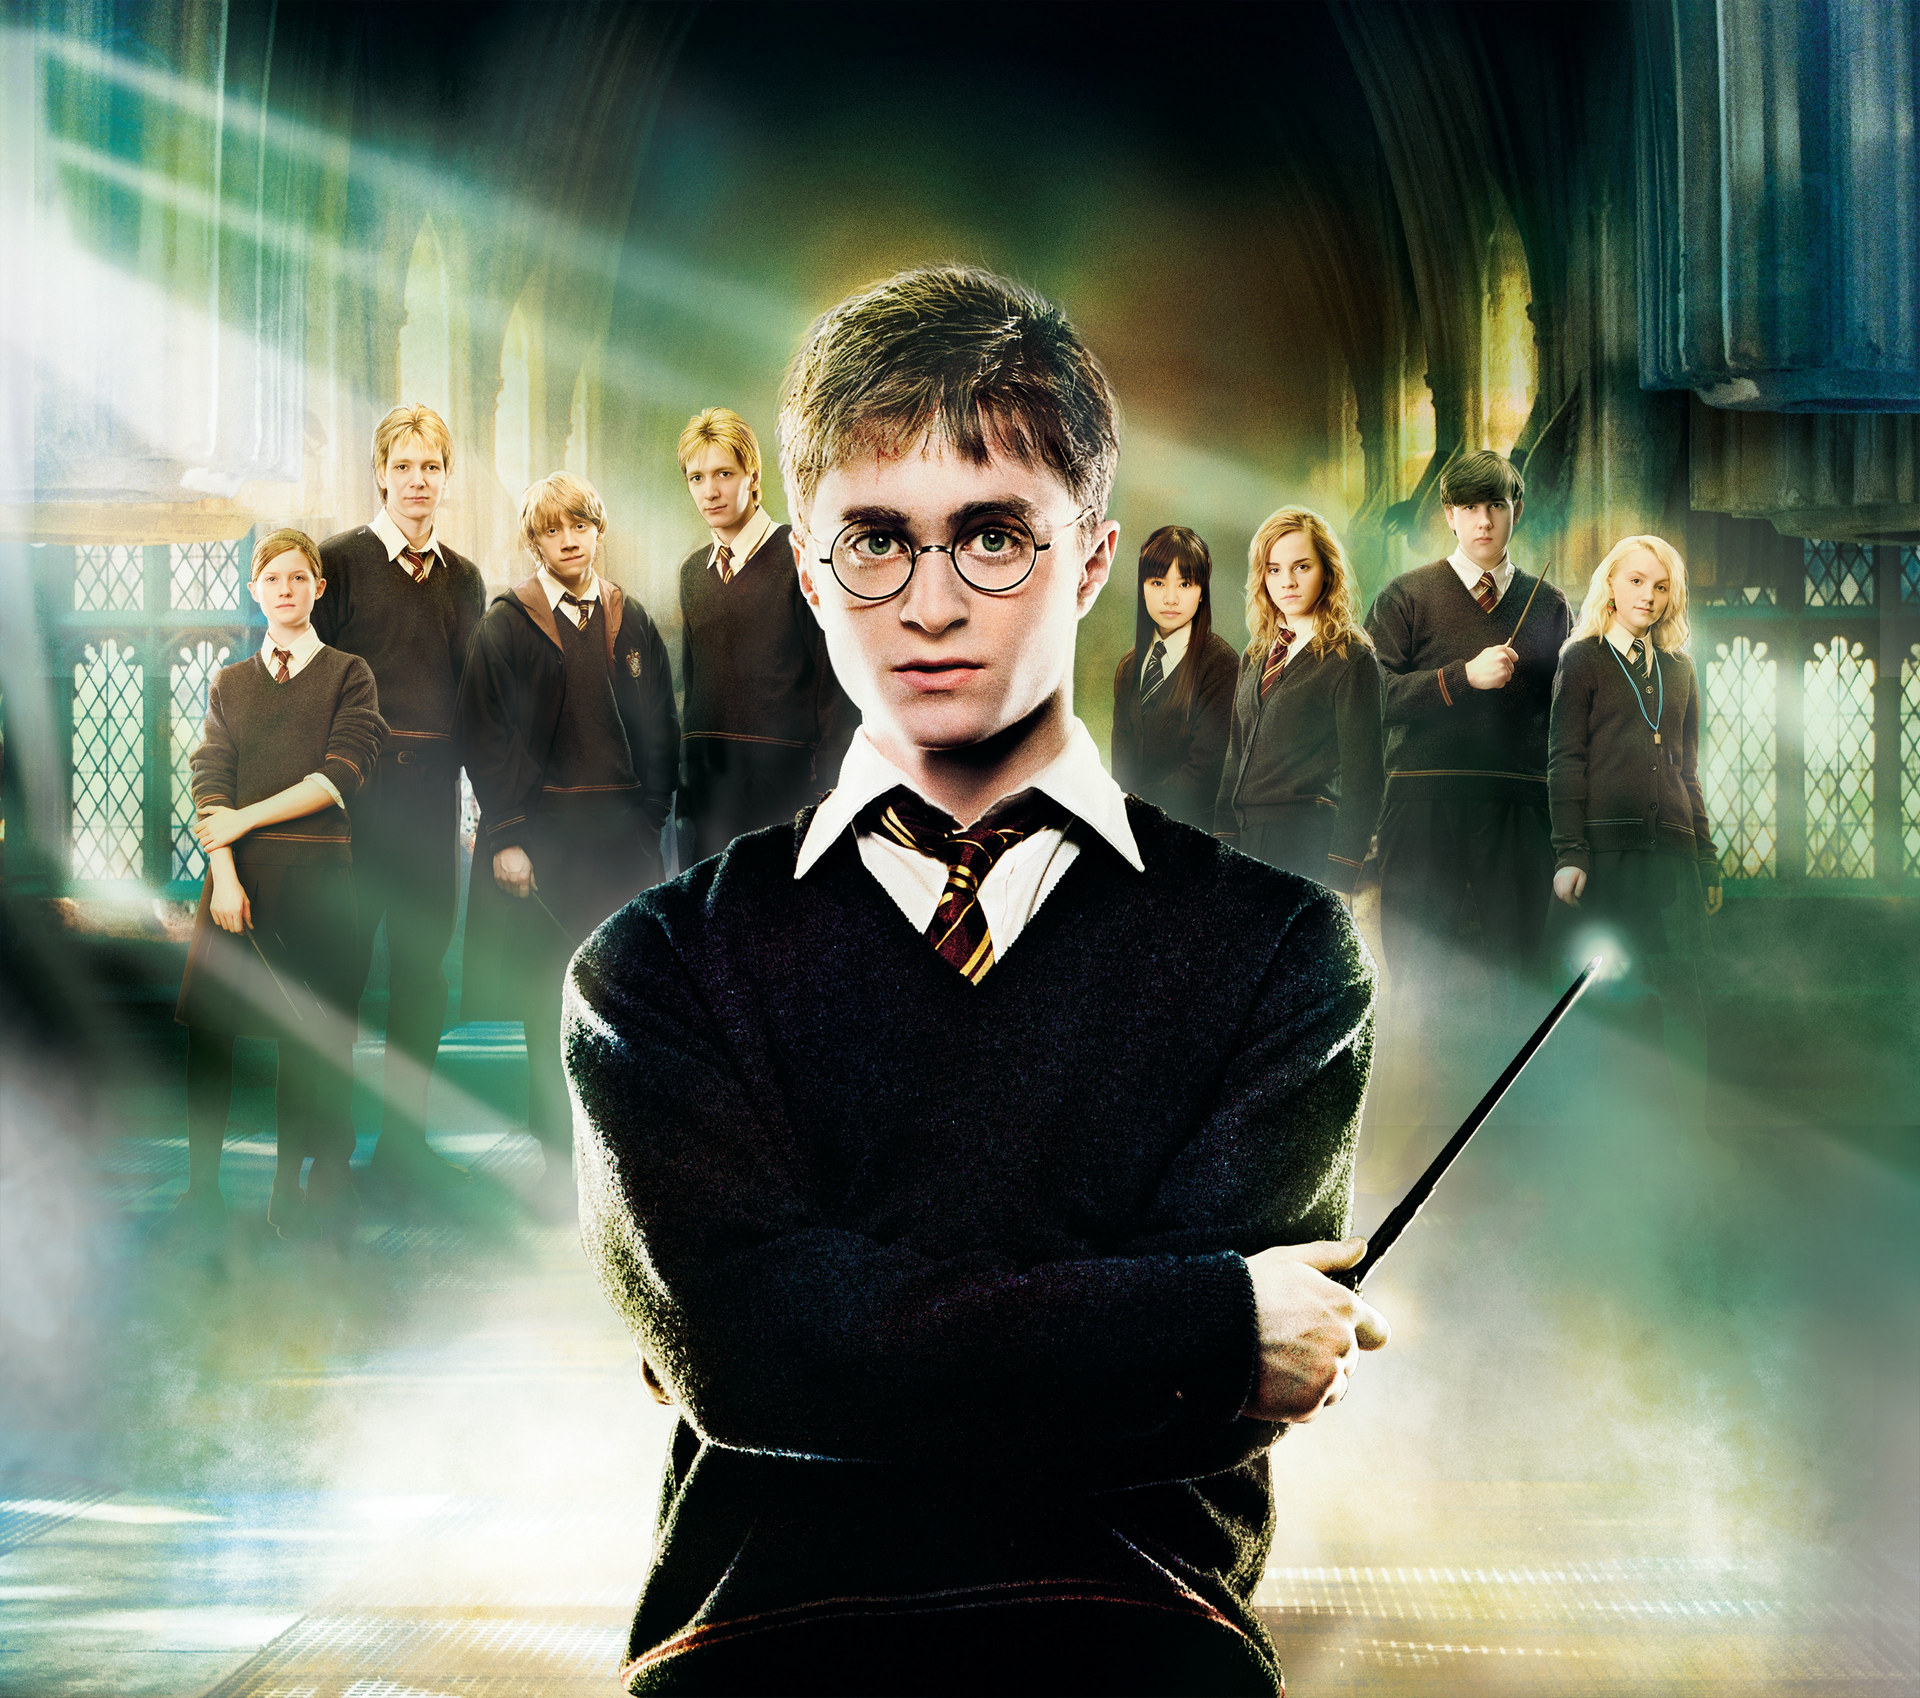 People 1920x1698 Harry Potter and the Order of the Phoenix group of people looking at viewer Harry Potter Hermione Granger Ron Weasley movies movie characters actor actress Daniel Radcliffe Emma Watson Luna Lovegood Cho Chang Ginny Weasley Fred Weasley (Harry Potter) George Weasley (Harry Potter) Nevile Longbottom (Harry Potter) Book characters